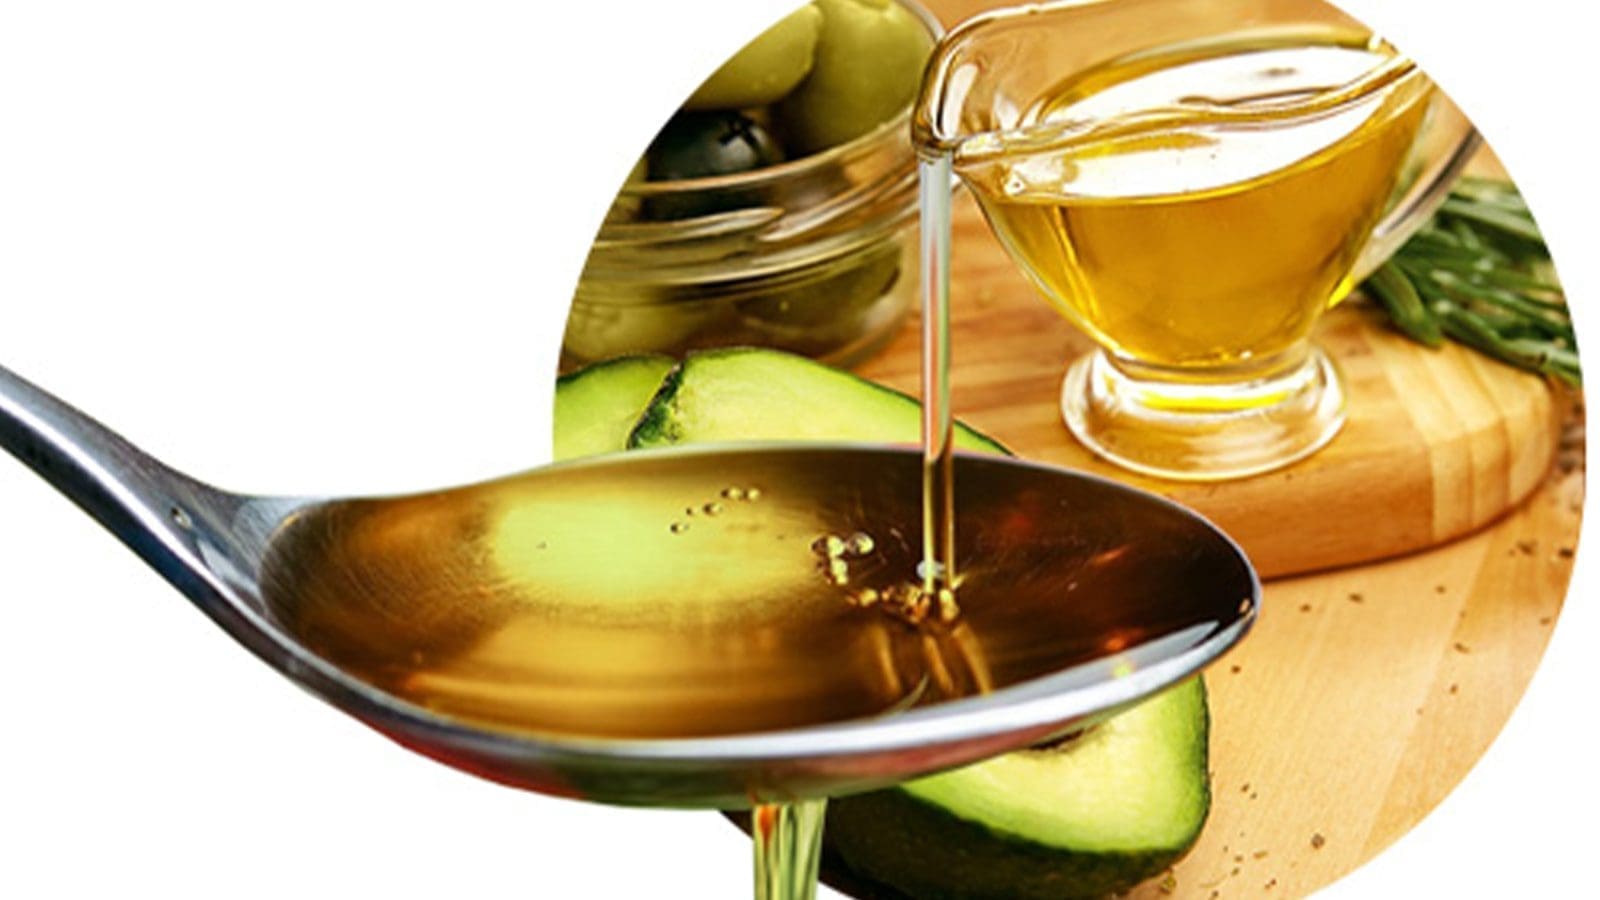 UC Davis identifies key markers to ensure authenticity of avocado oil for retail food industry